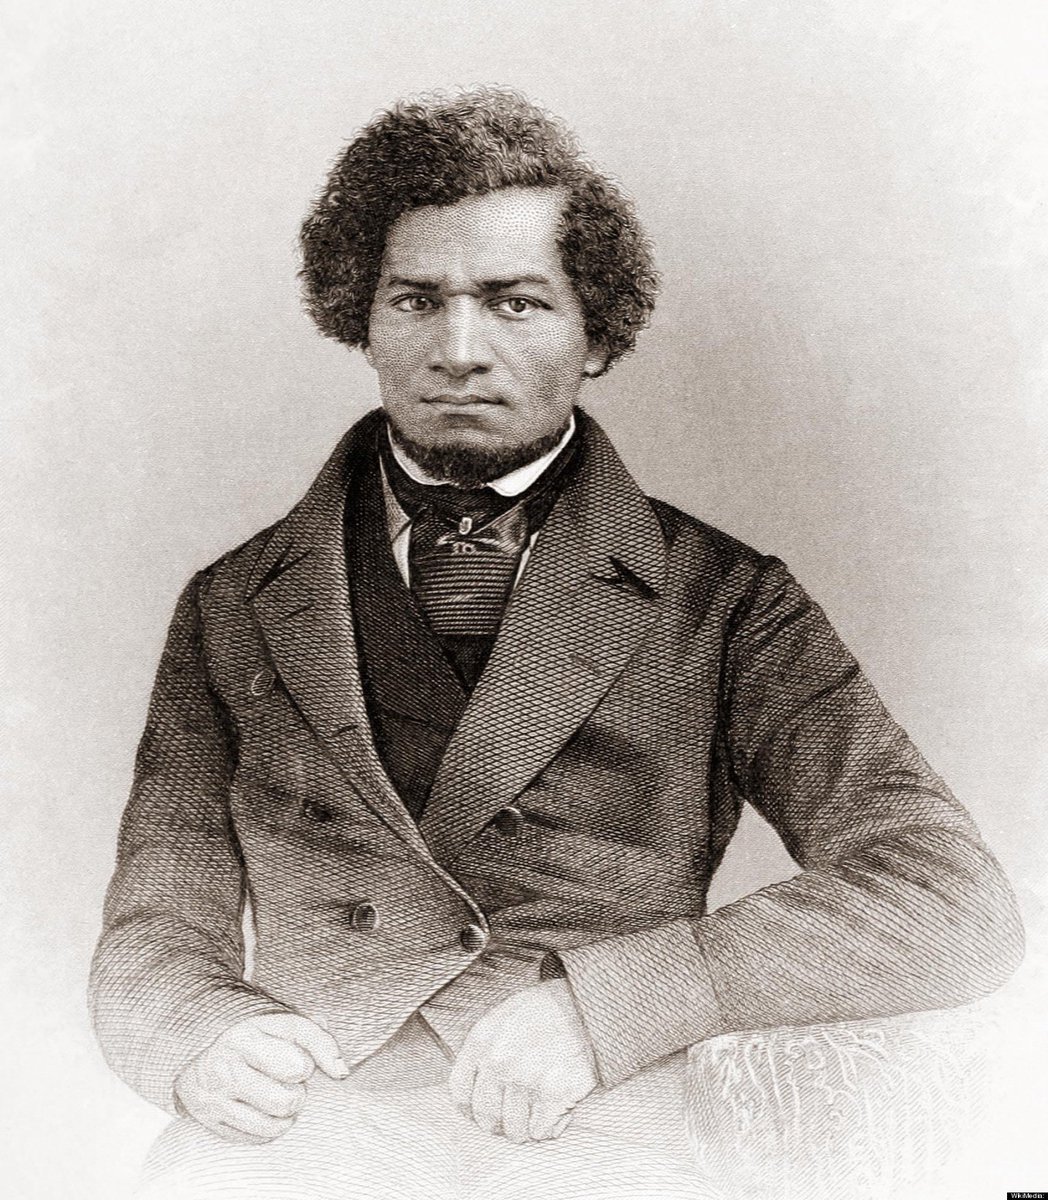 “To make a contented slave, it is necessary to make a thoughtless one. It is necessary to darken his moral and mental vision, and, as far as possible, to annihilate the power of reason.”
-Frederick Douglass https://t.co/gVrIkXYrOC